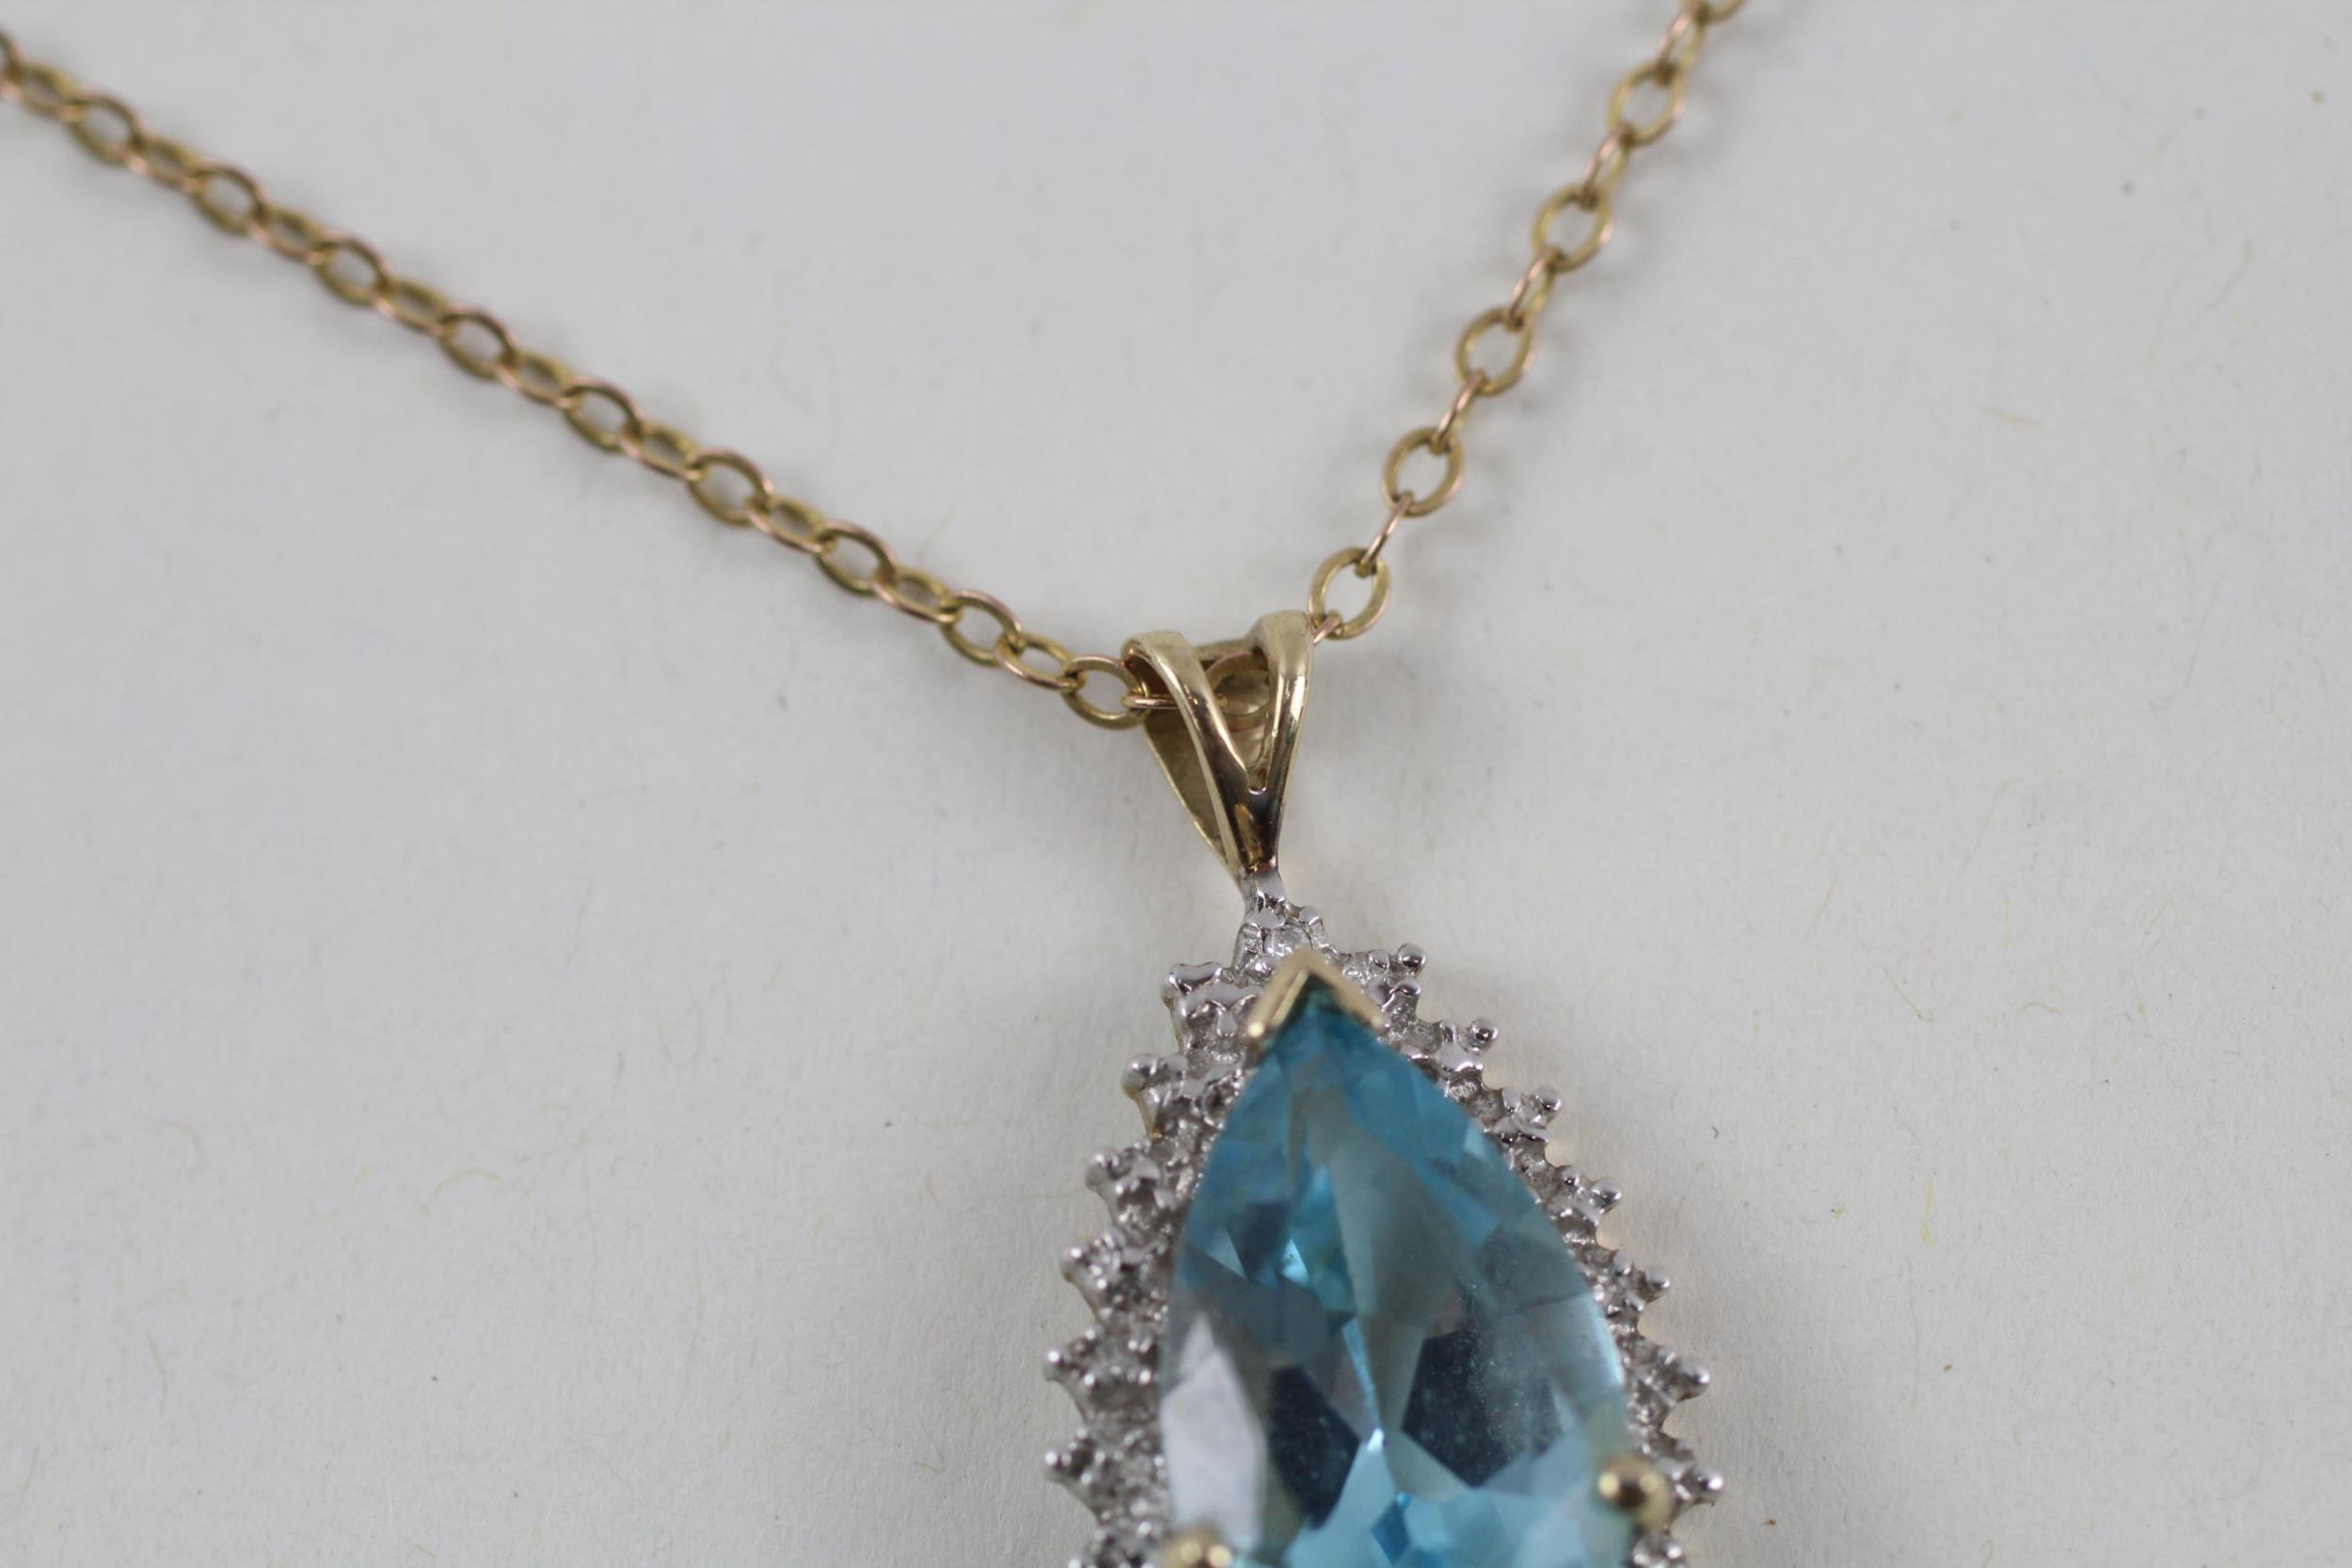 9ct gold pear cut blue topaz & diamond cluster pendant necklace (3.8g) - Image 4 of 6